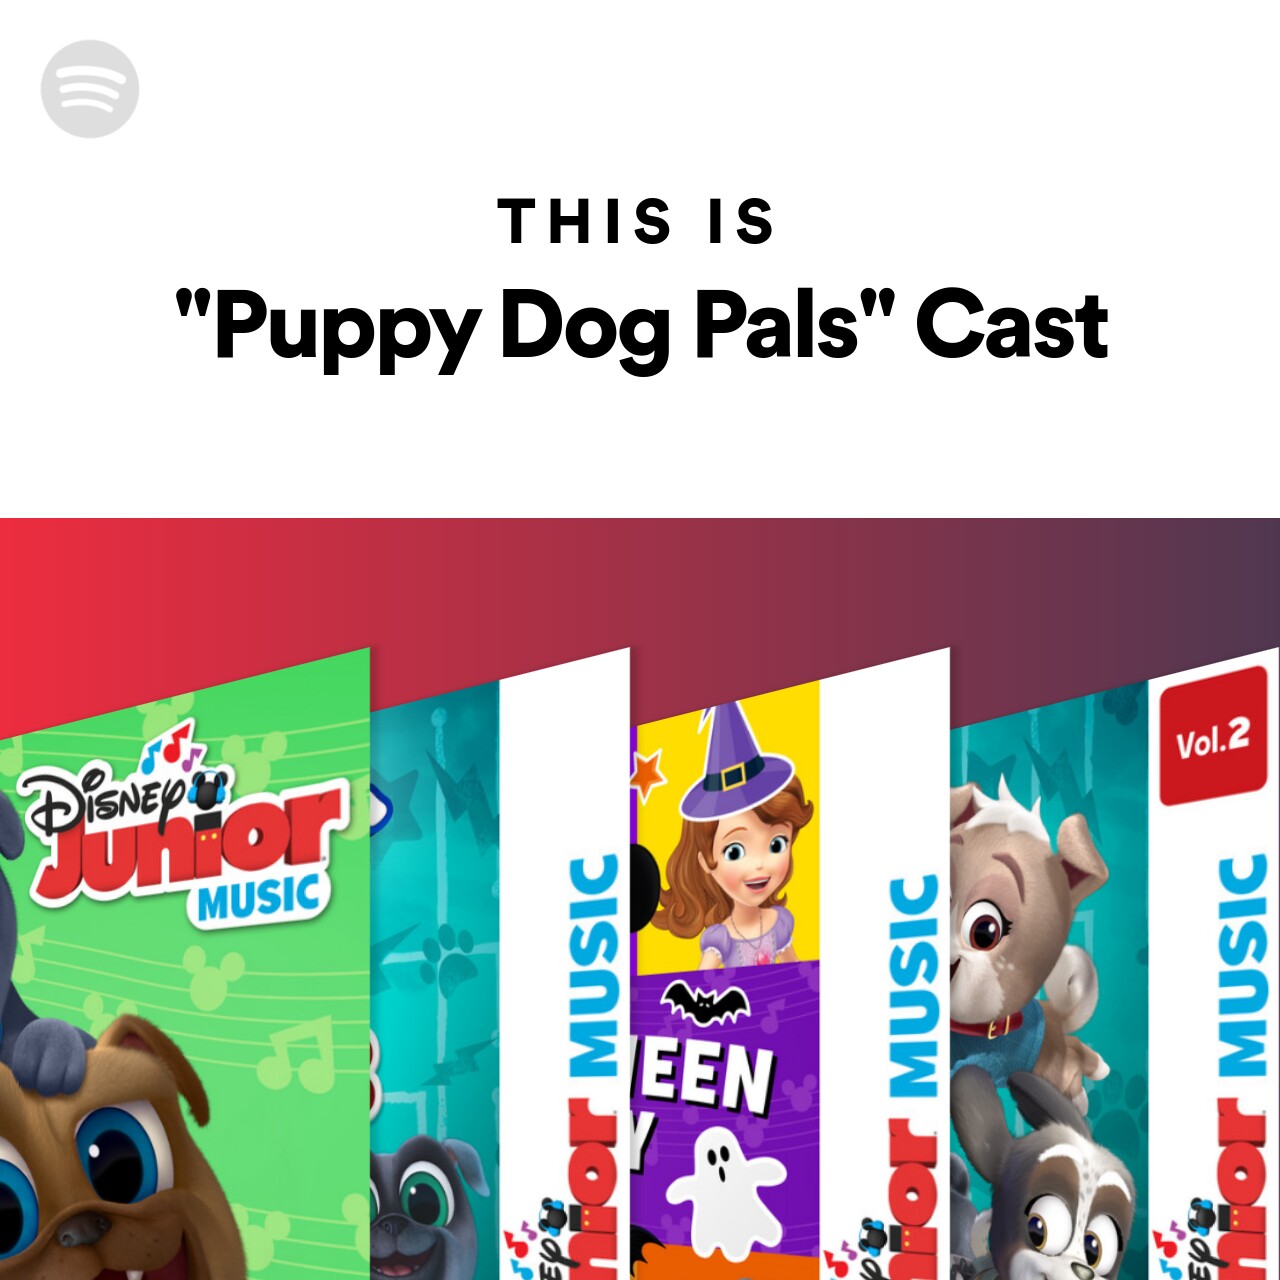 This Is "Puppy Dog Pals" Cast